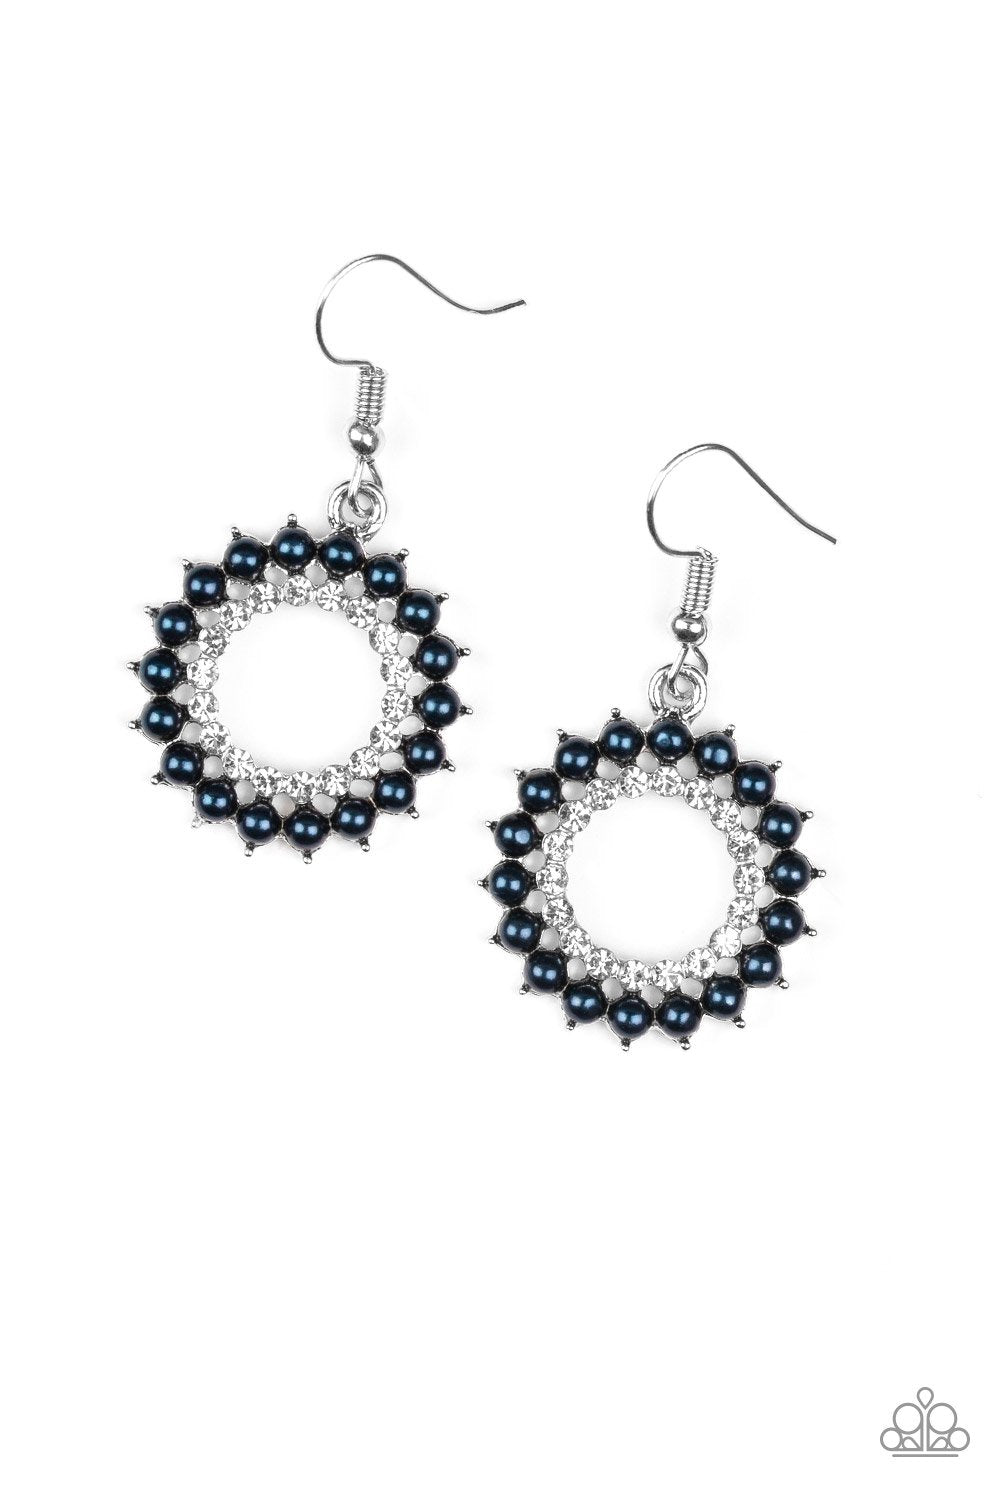 Wreathed In Radiance Metallic Blue Pearl Earrings - Paparazzi Accessories-CarasShop.com - $5 Jewelry by Cara Jewels